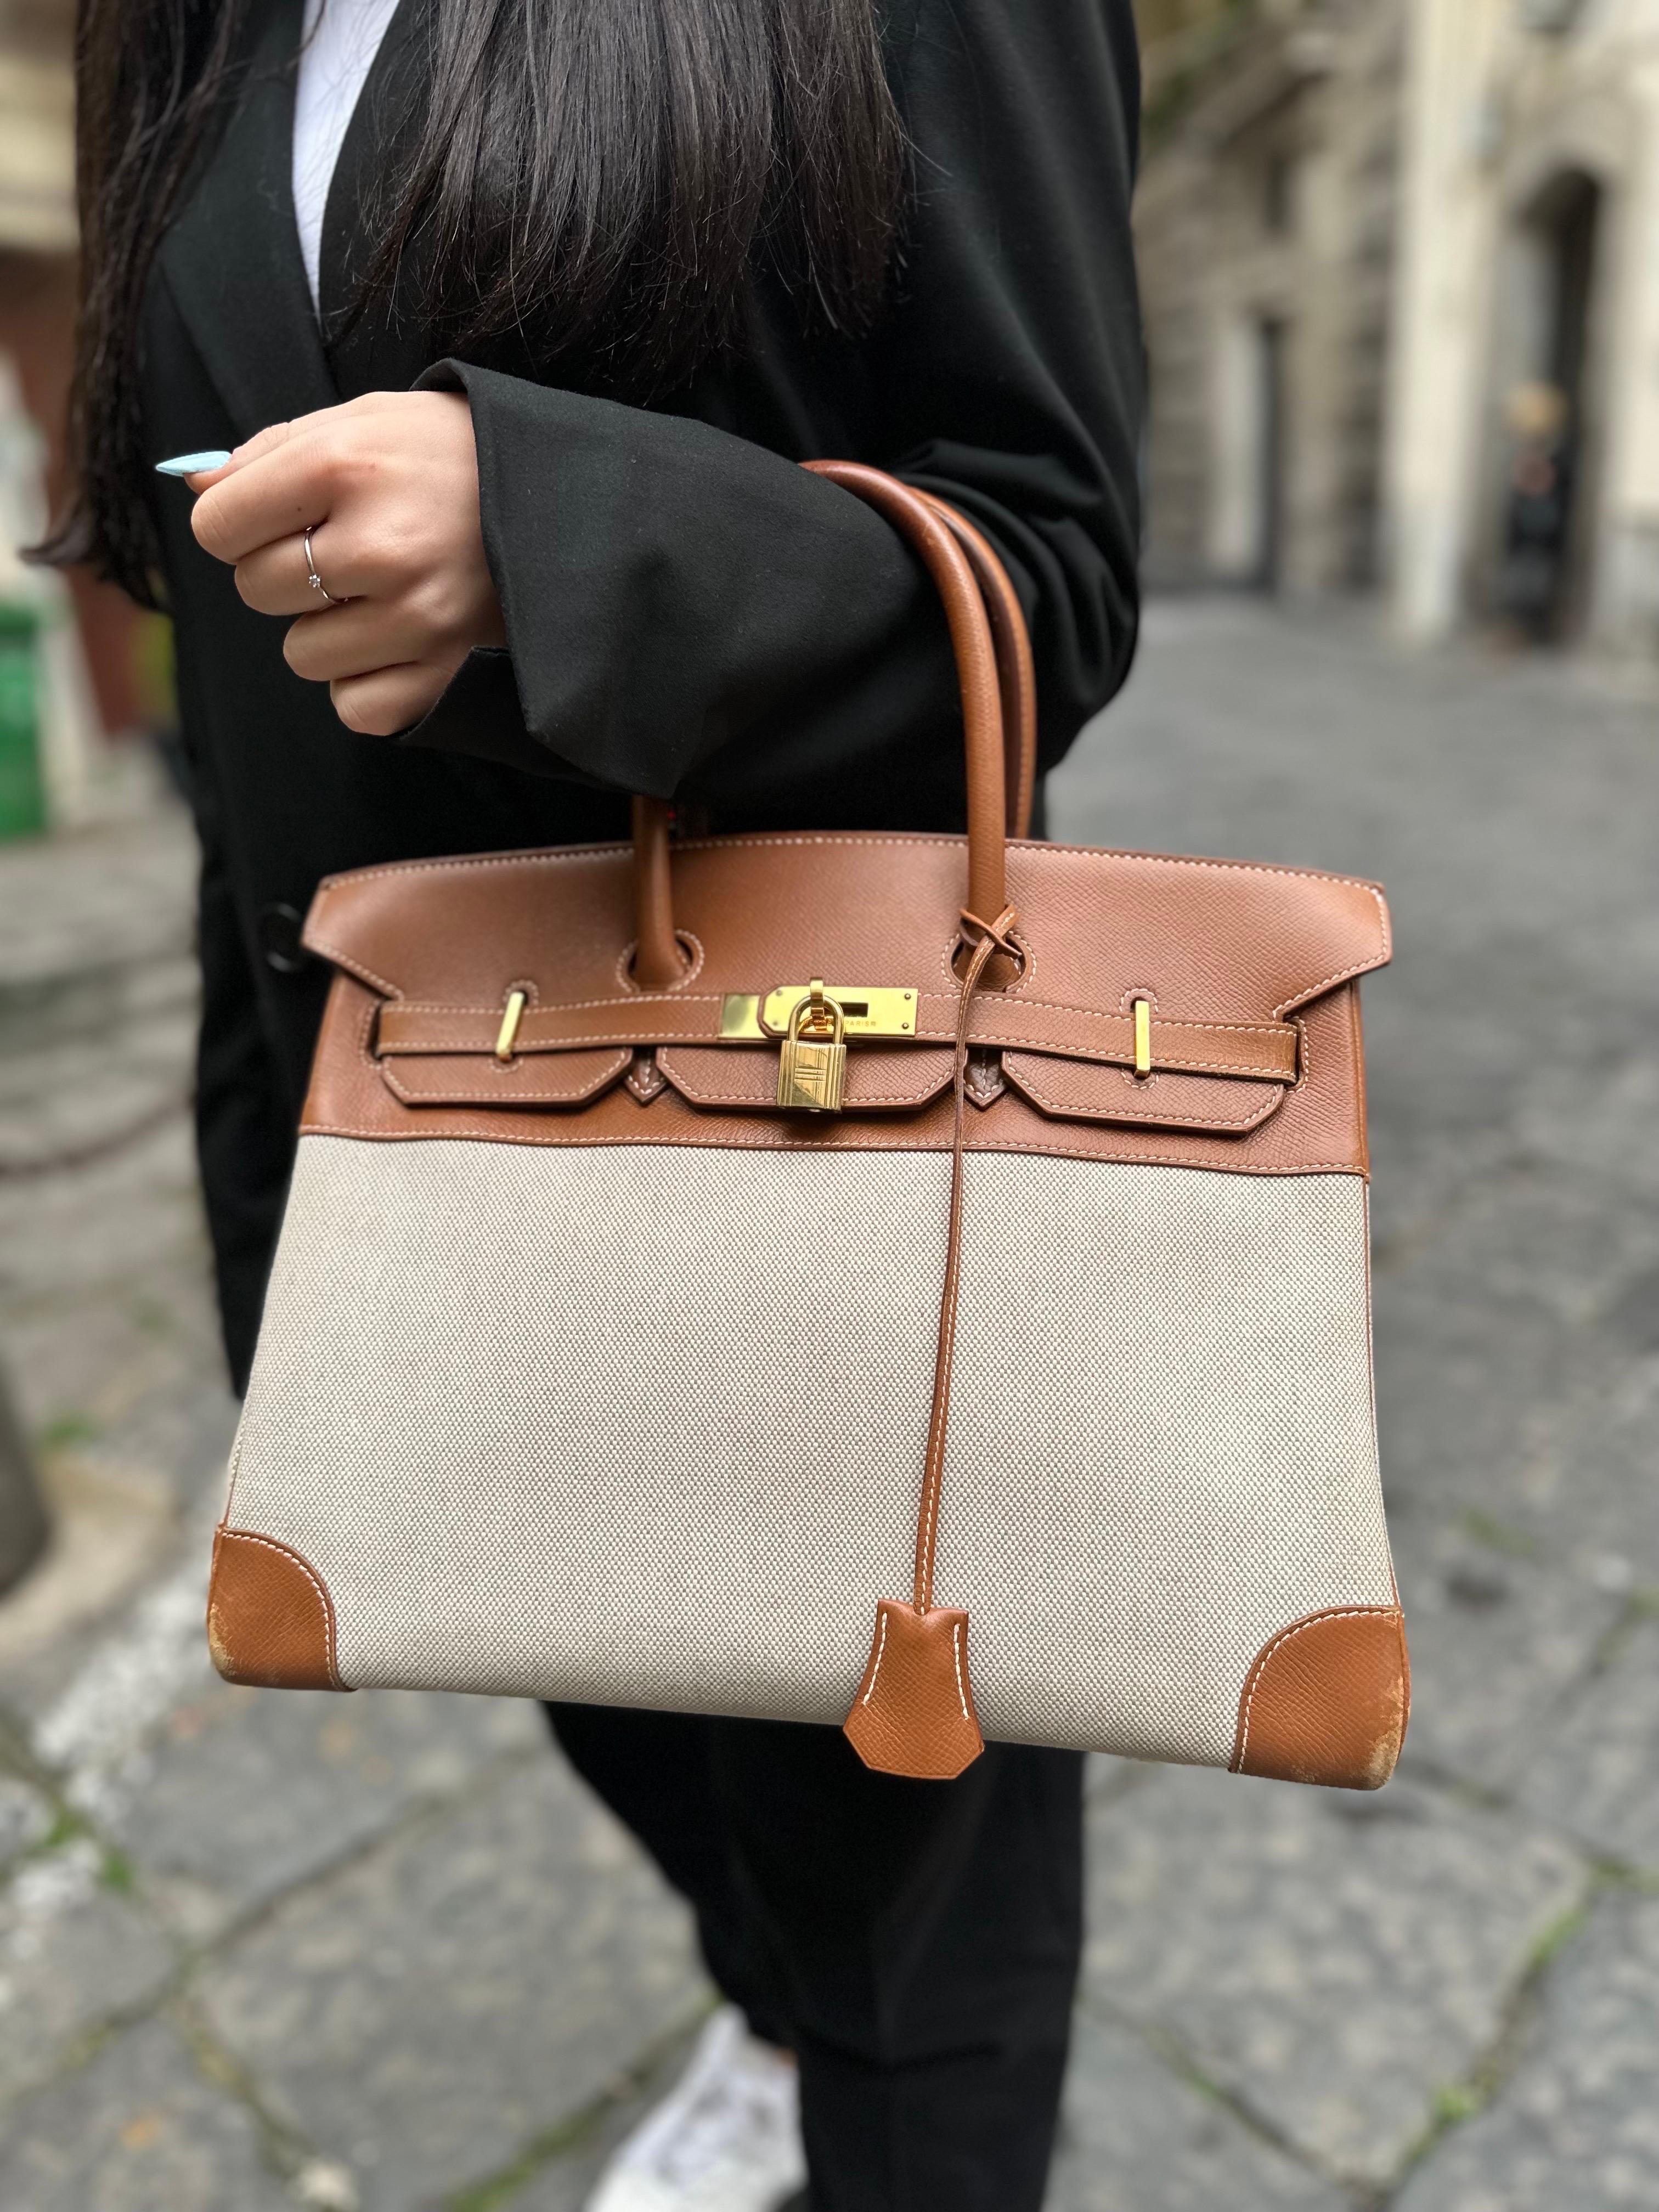 Hermès bag, Birkin model, size 35, made in two materials: the upper part in Epsom leather, rigid to the touch with fine grain, Gold color and the lower part in beige canvas. Equipped with the classic interlocking flap, with horizontal band closure,